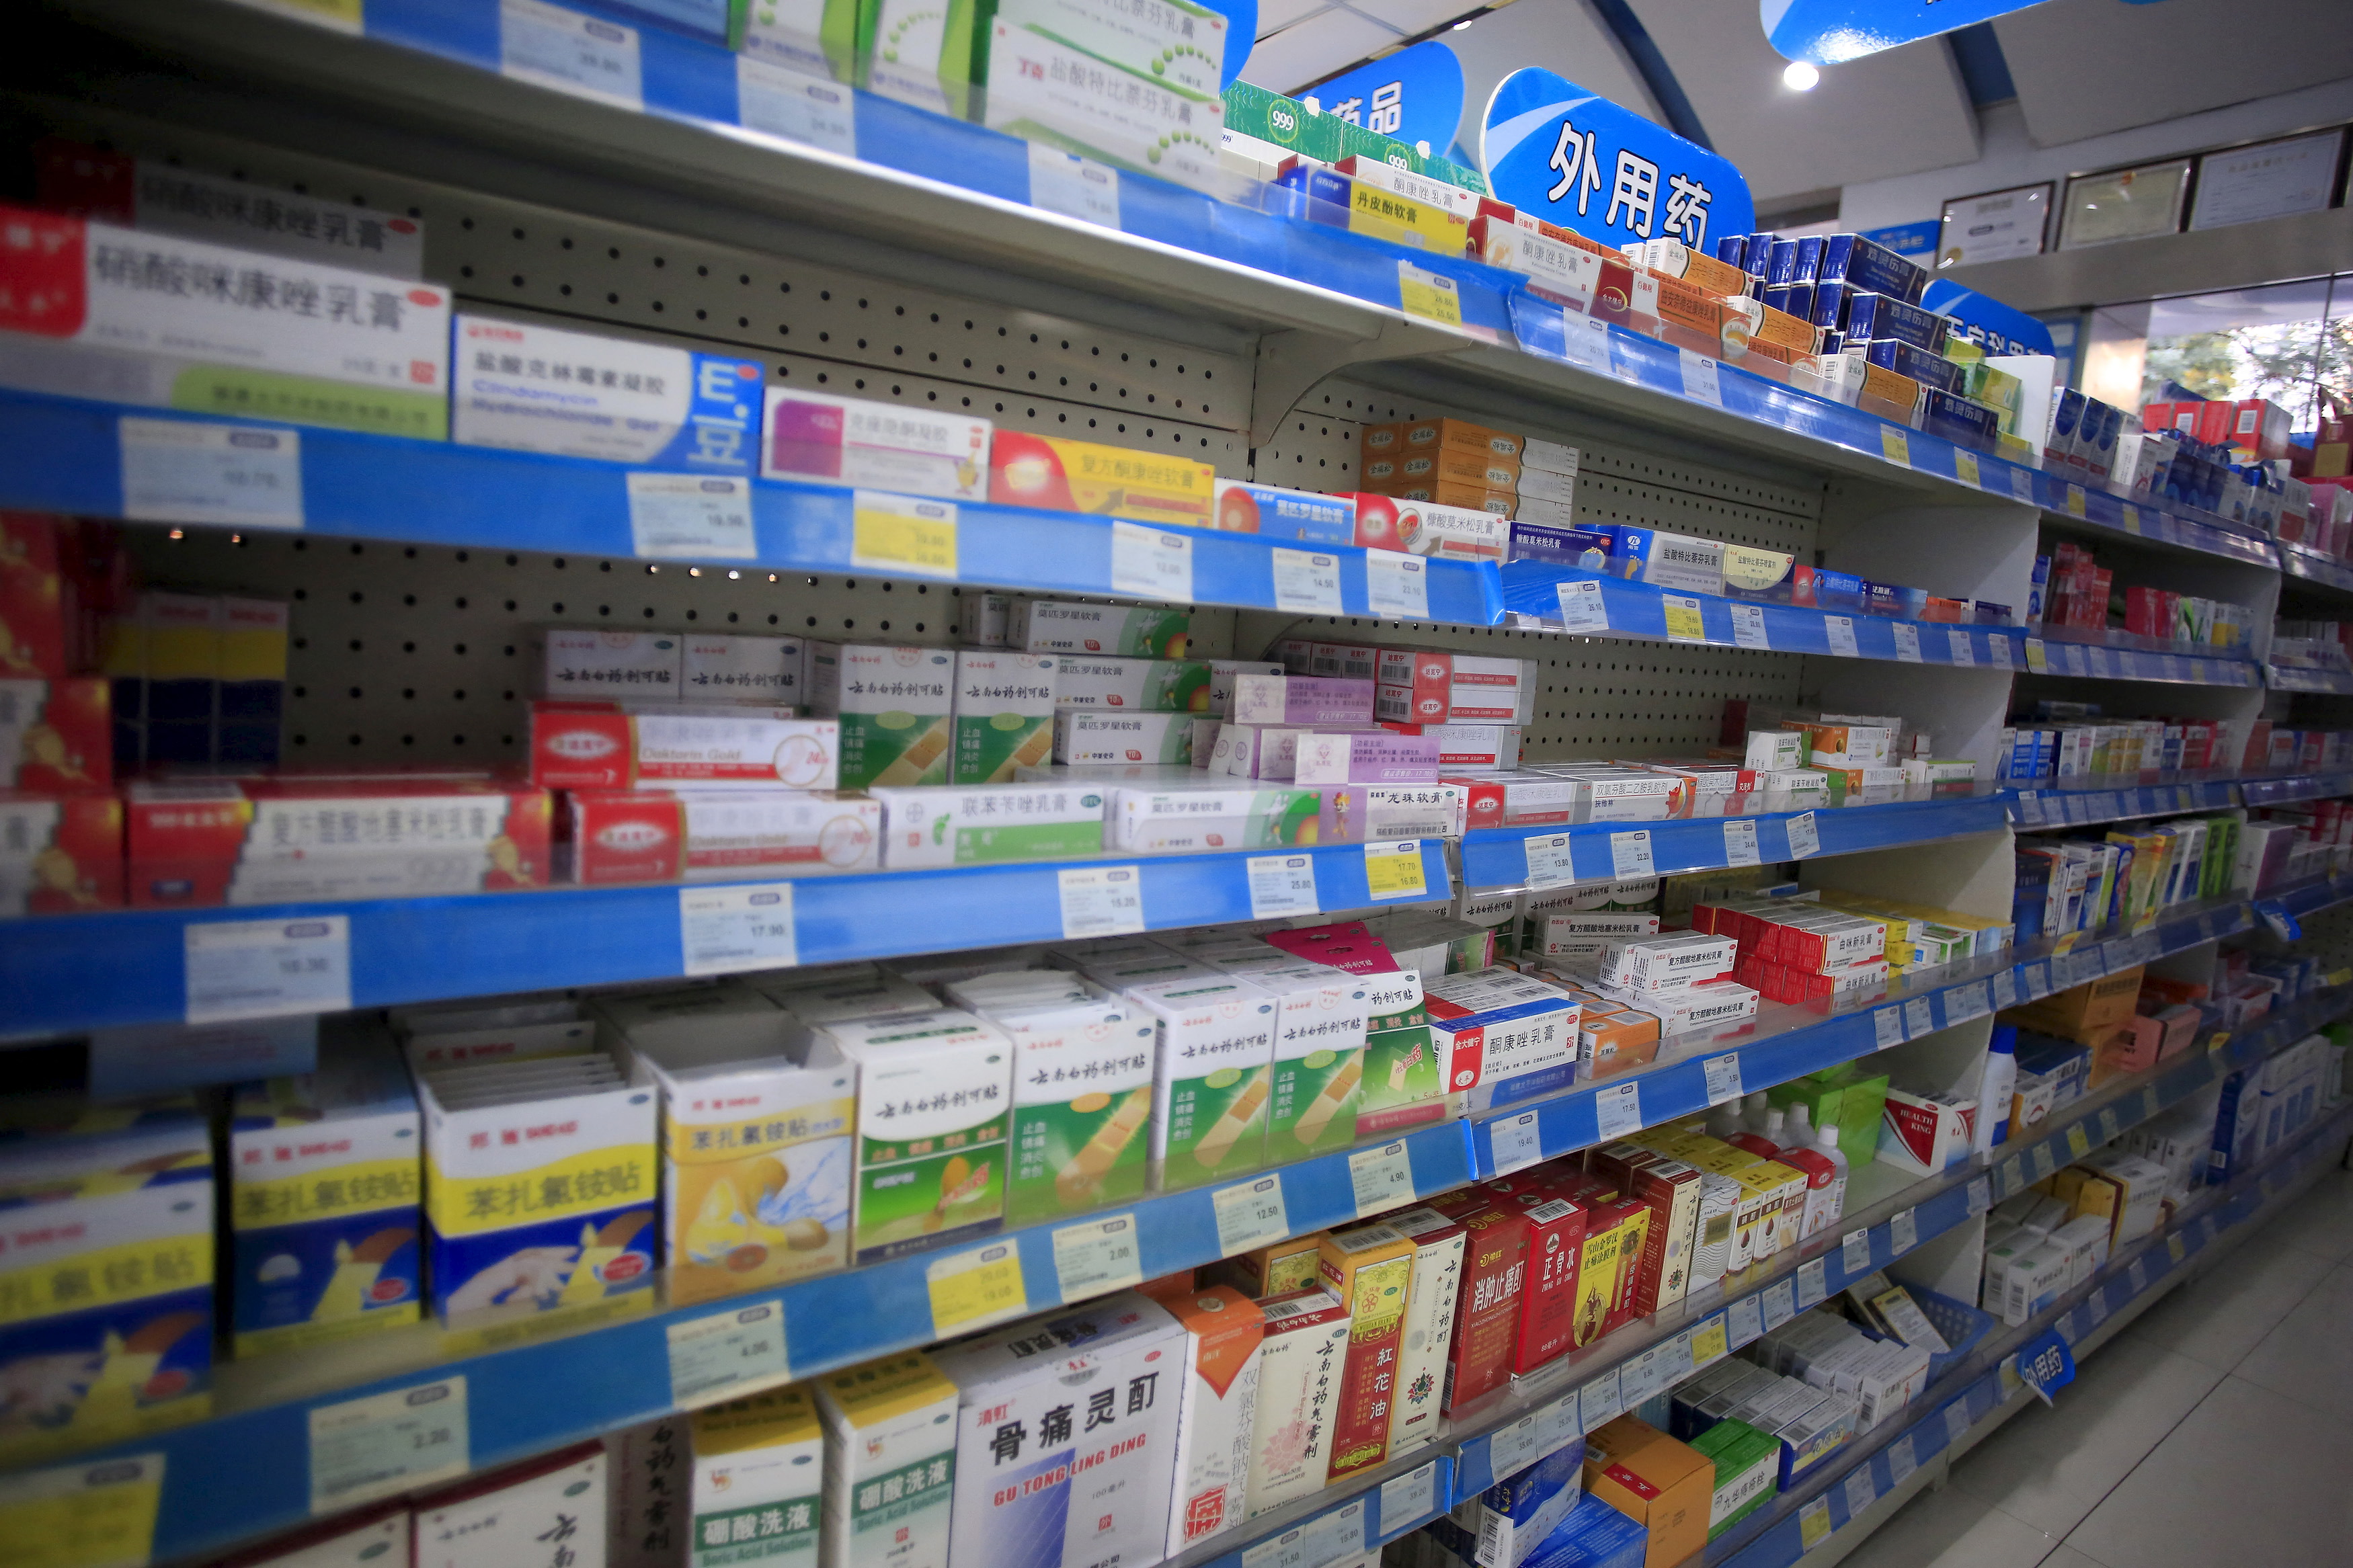 Shelves displaying medicines are seen at a pharmacy in Shanghai